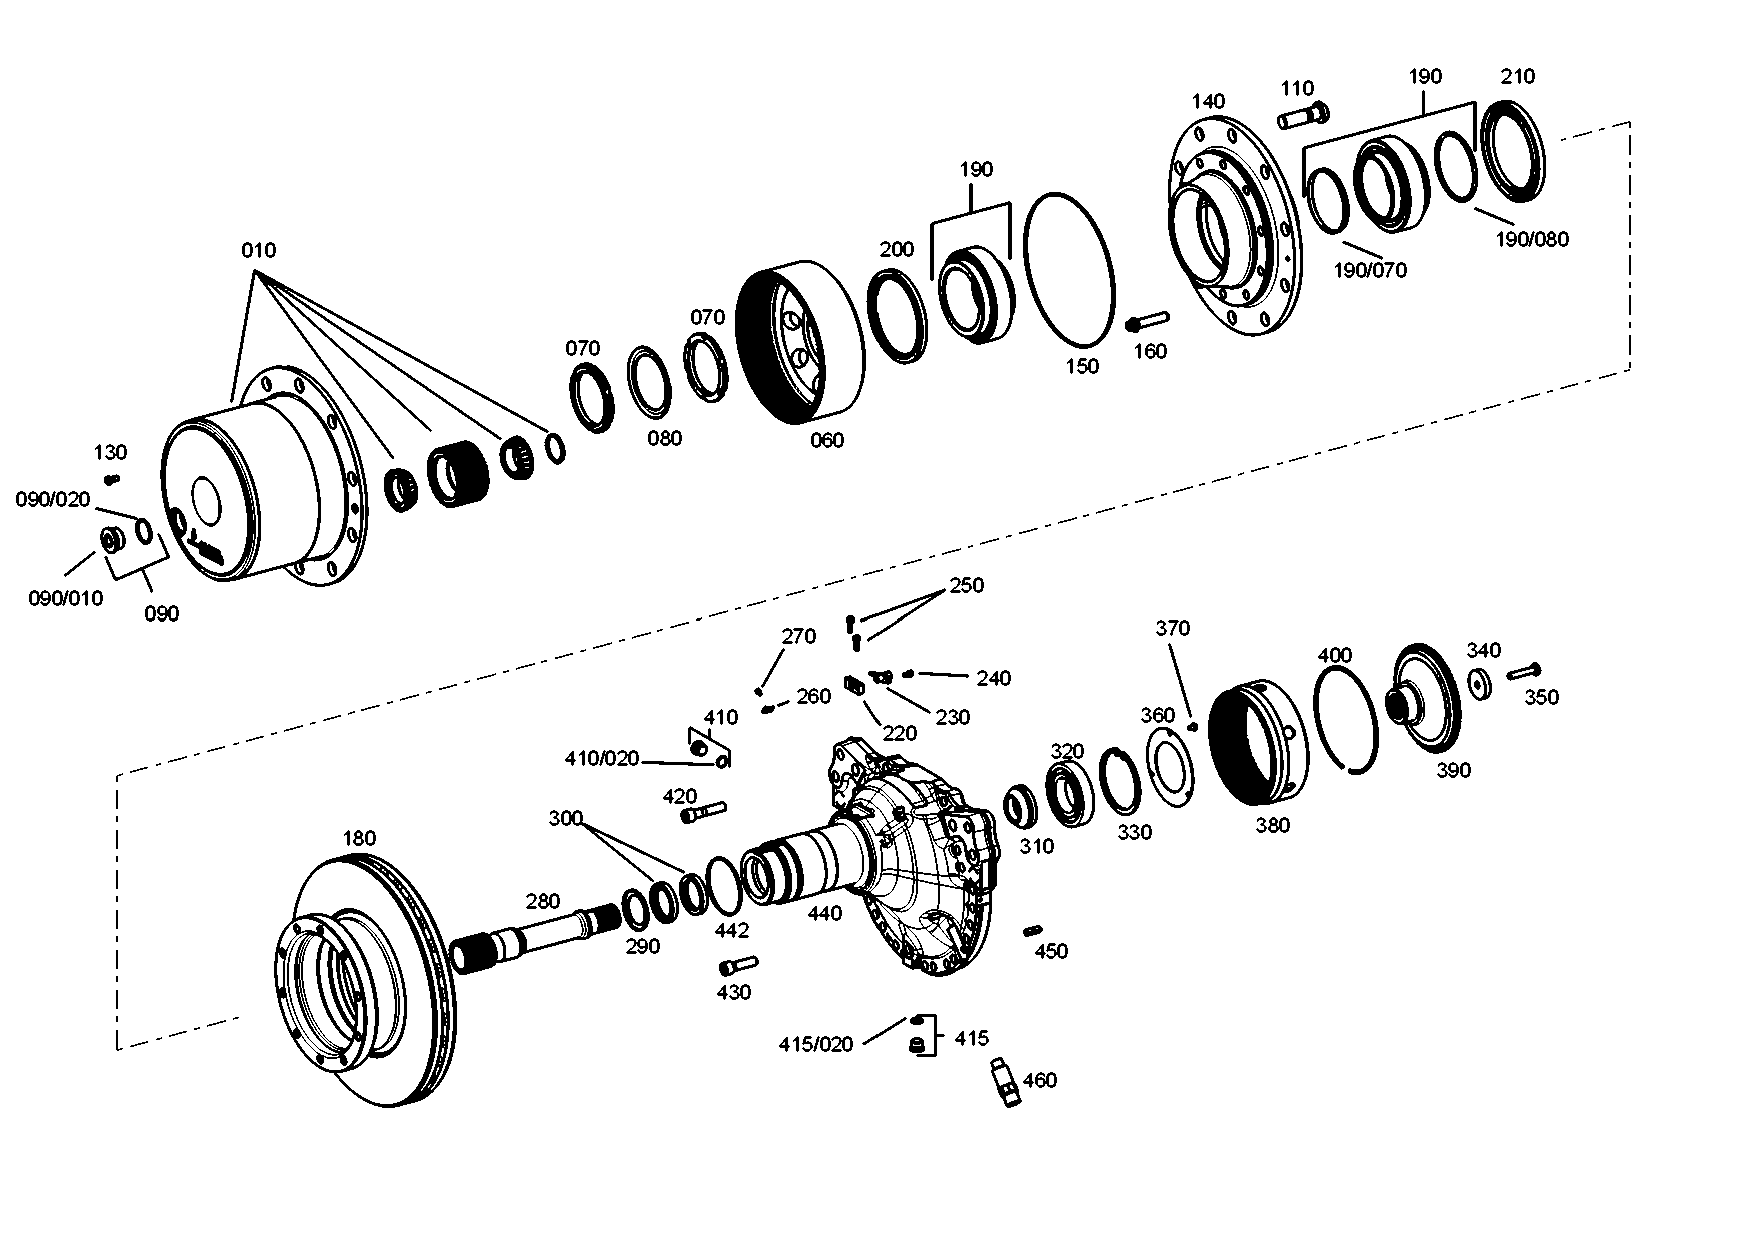 drawing for VOITH-GETRIEBE KG 01.0043.09 - O-RING (figure 3)